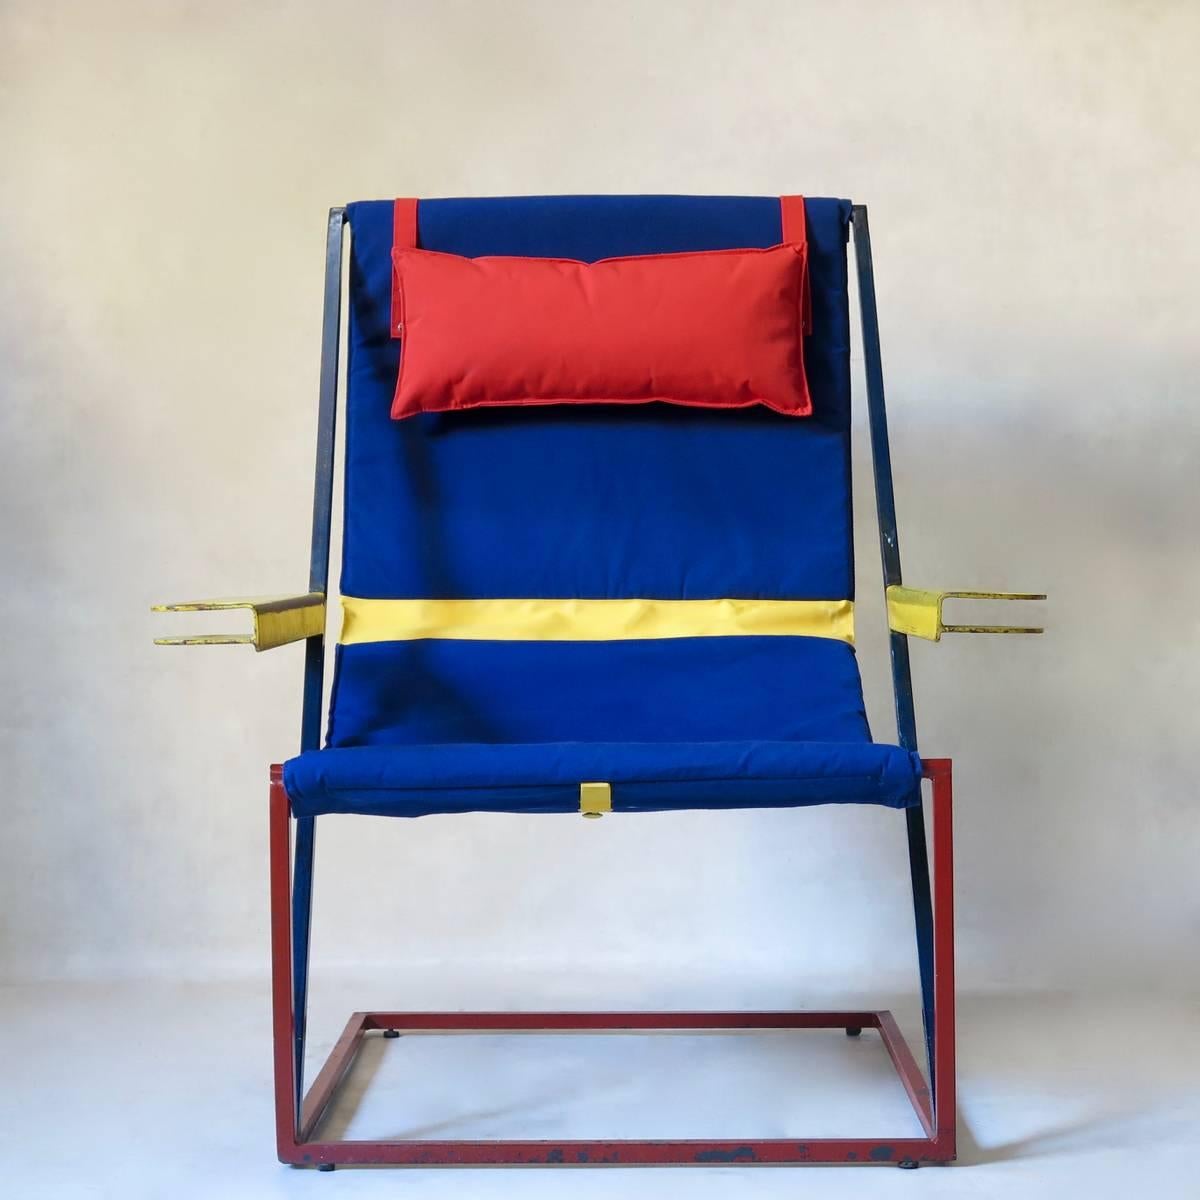 Absolutely amazing and one-of-a-kind pair of very large sun lounger chairs, with a cantilered iron structure, with original red, blue and yellow paint finish. The armrests have cutpot drinks' holders inset.
Newly upholstered in outdoor fabric.